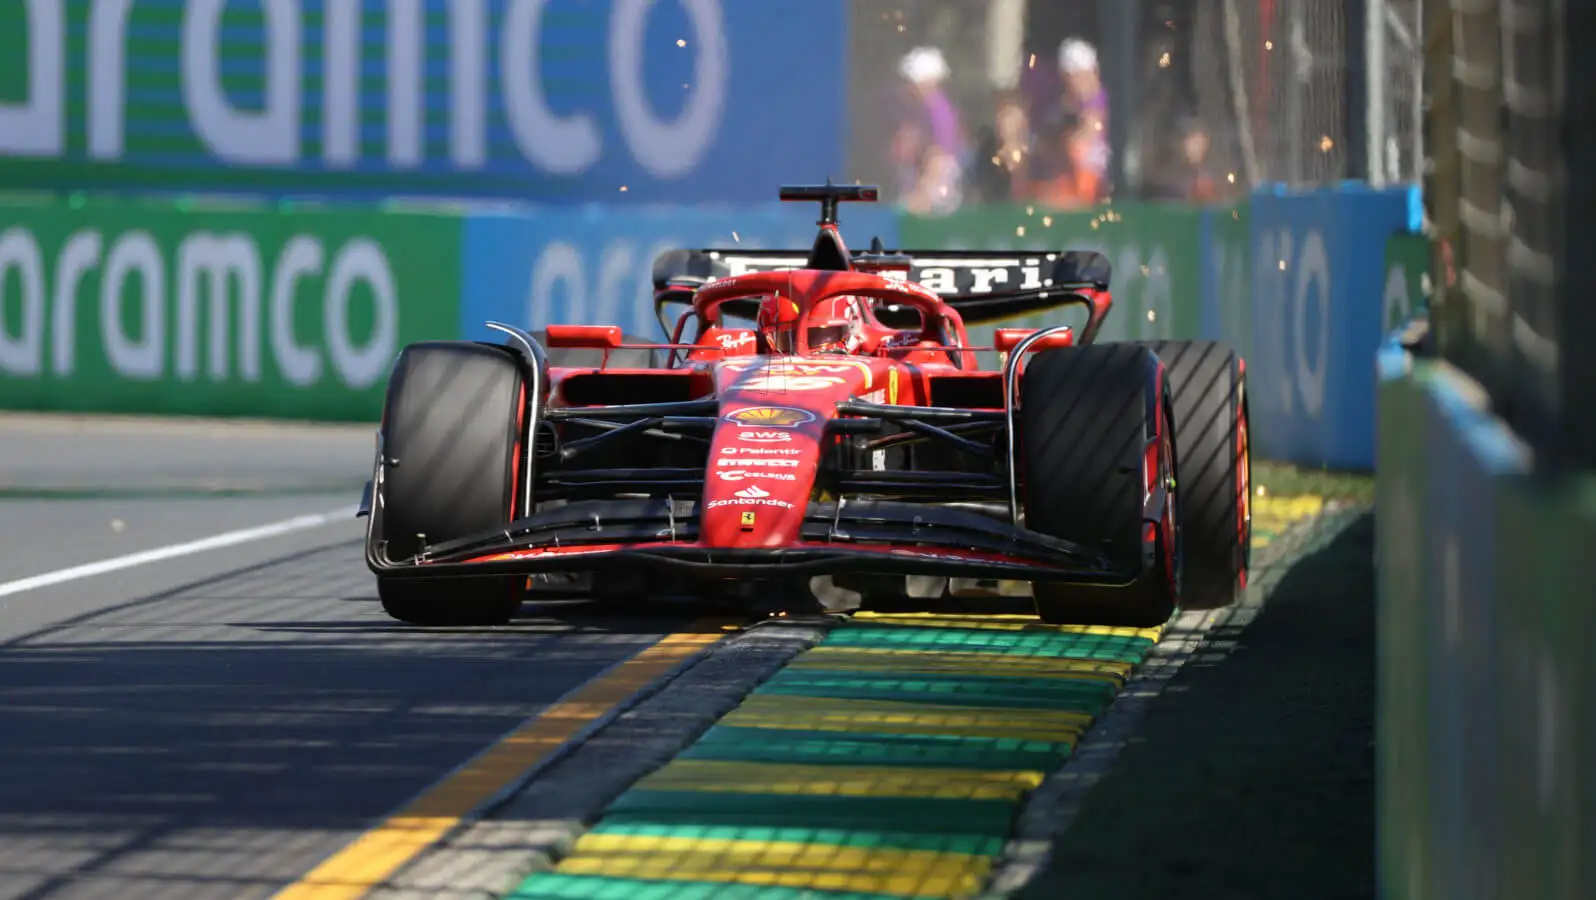 Australian GP: Charles Leclerc quickest in FP3 as Sainz silences fitness questions